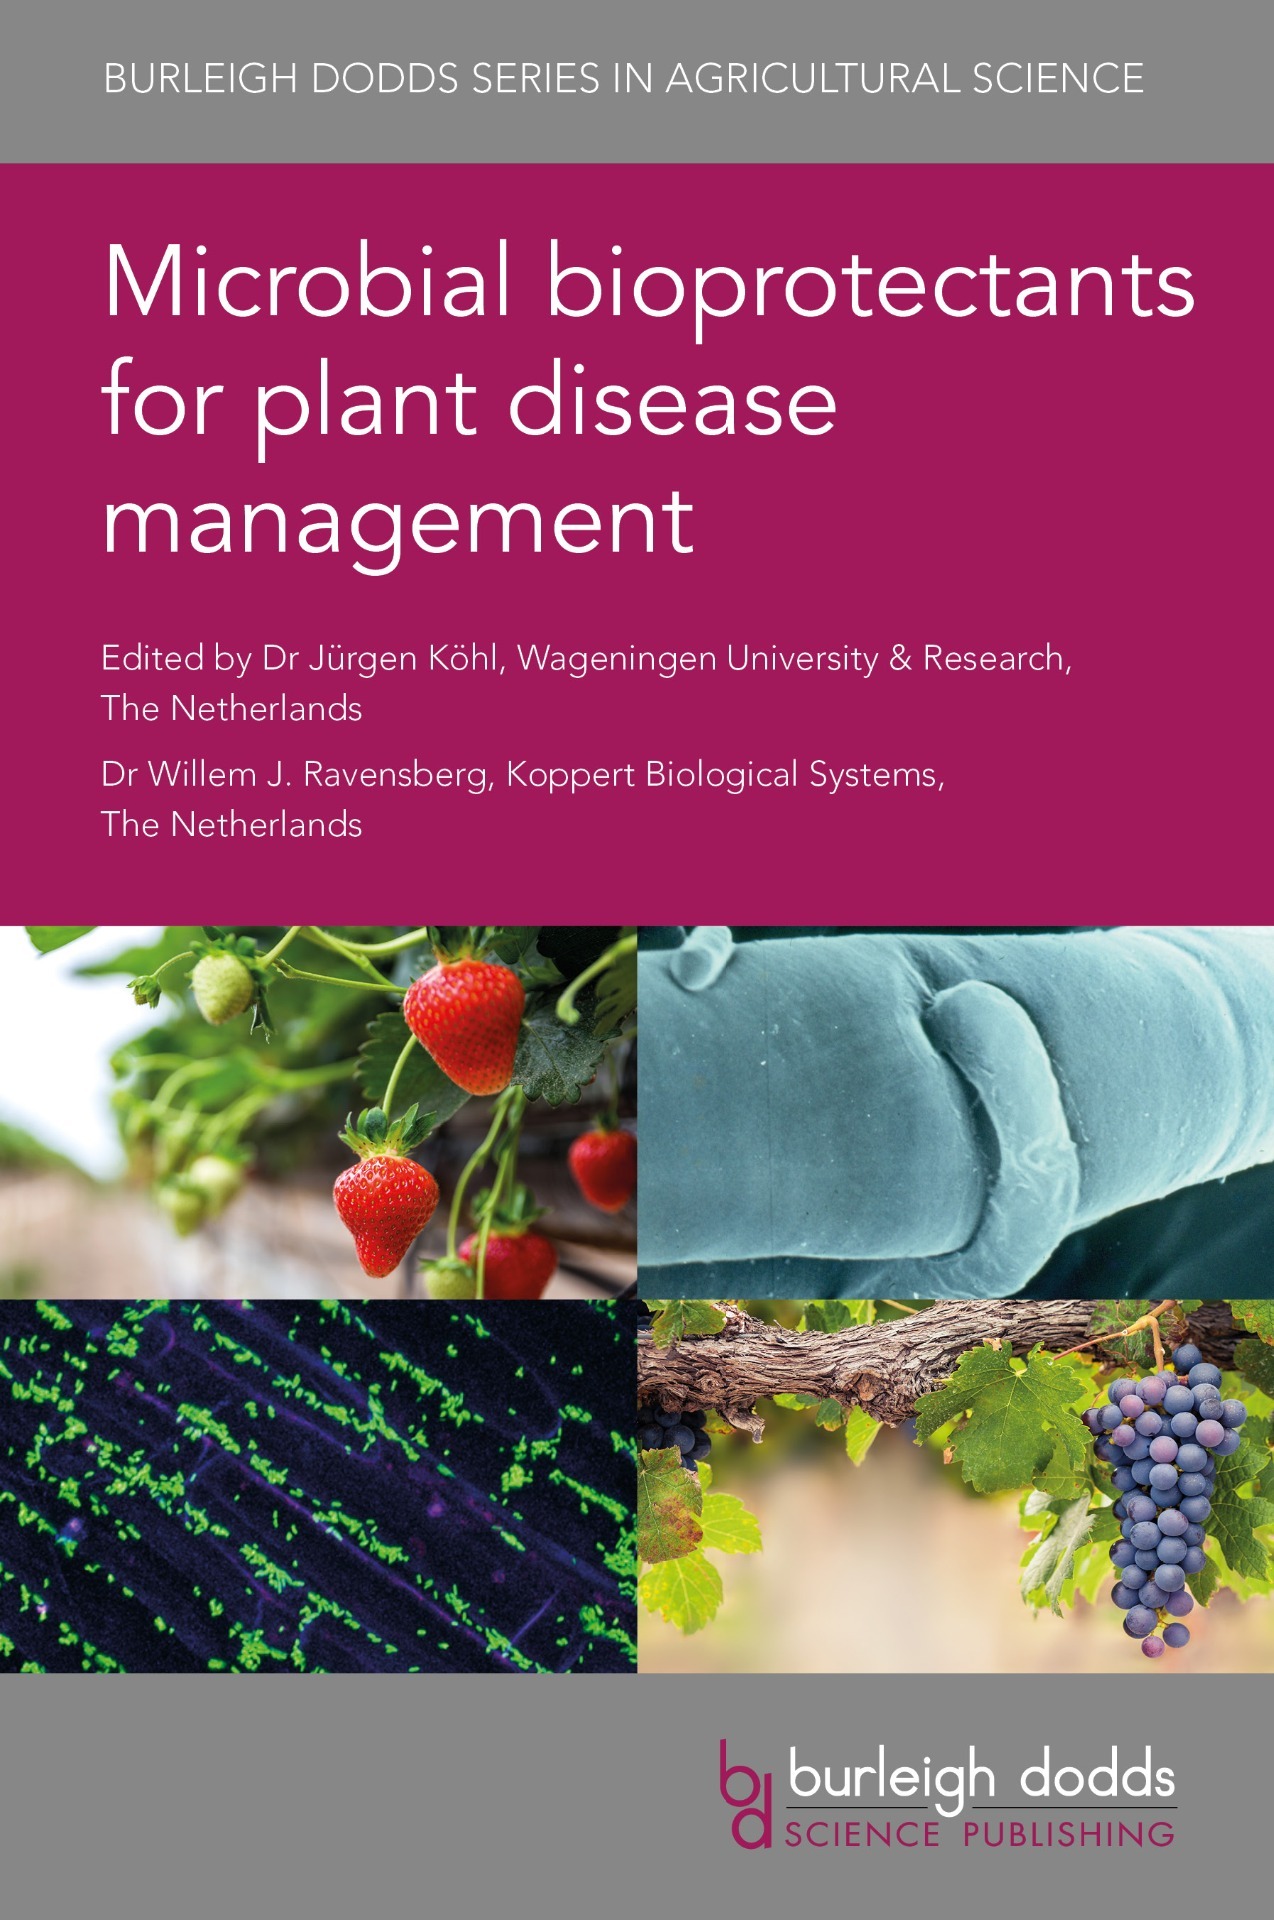 Book cover image - Microbial bioprotectants for plant disease management